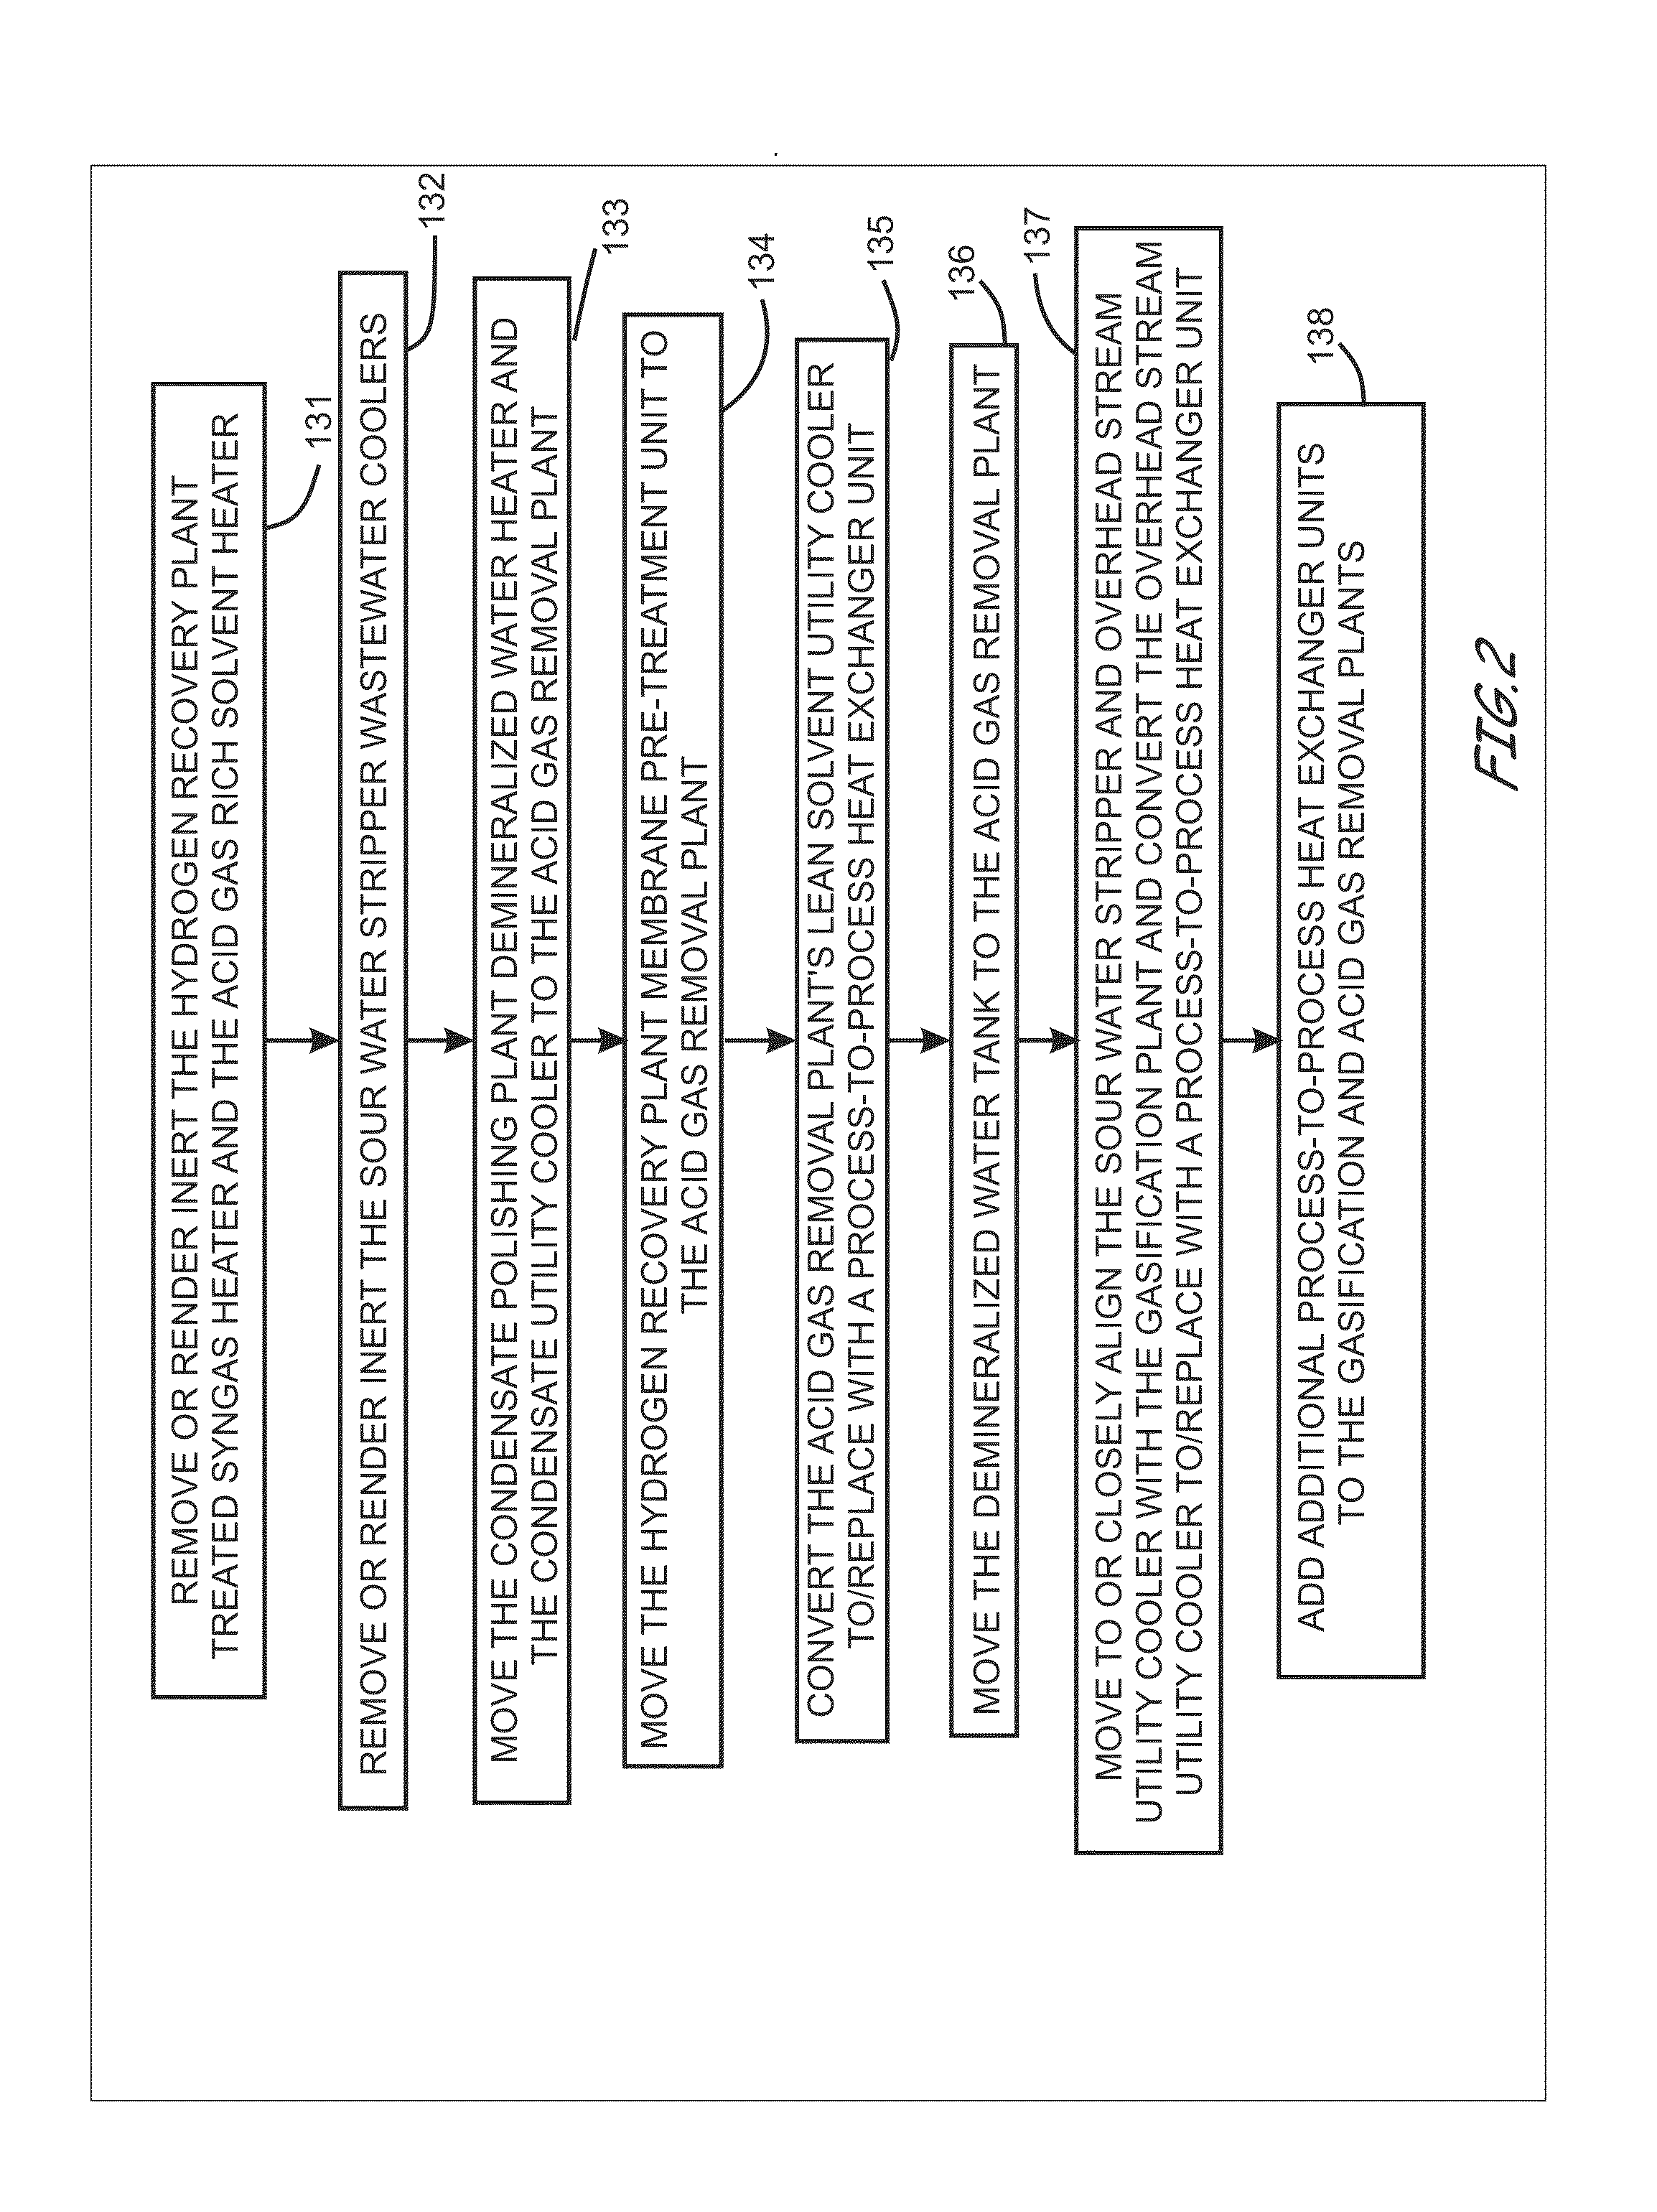 Energy efficient gasification based multi generation apparatus employing energy efficient gasification plant-directed process schemes and related methods